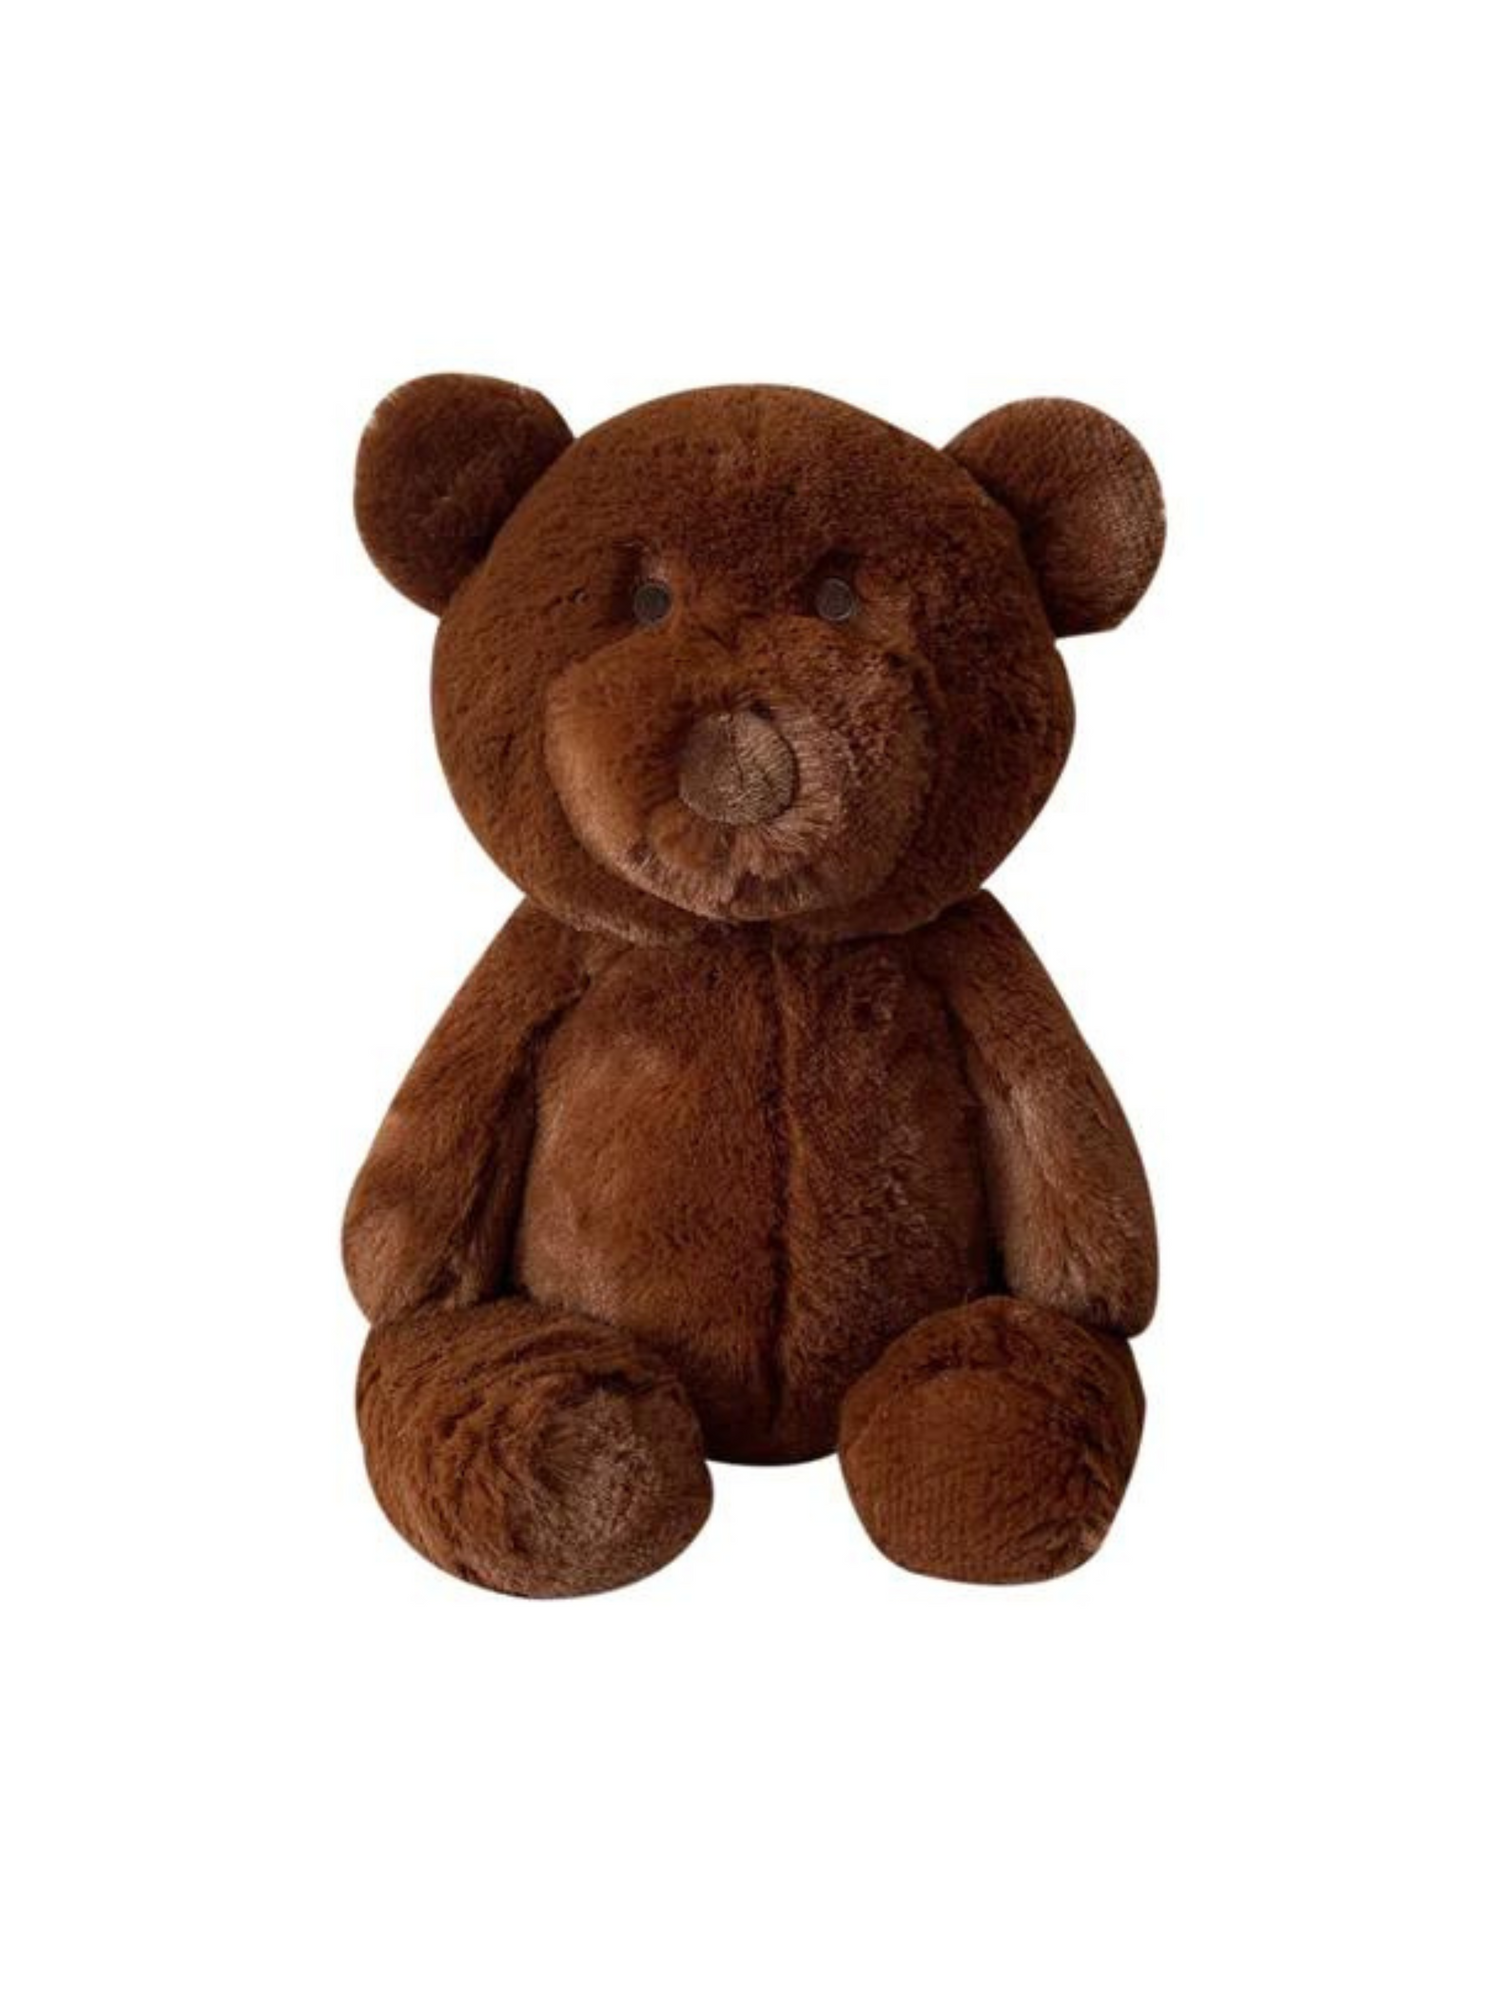 O.B. DESIGNS MAPLE BEAR SOFT TOY - THE LITTLE EAGLE BOUTIQUE